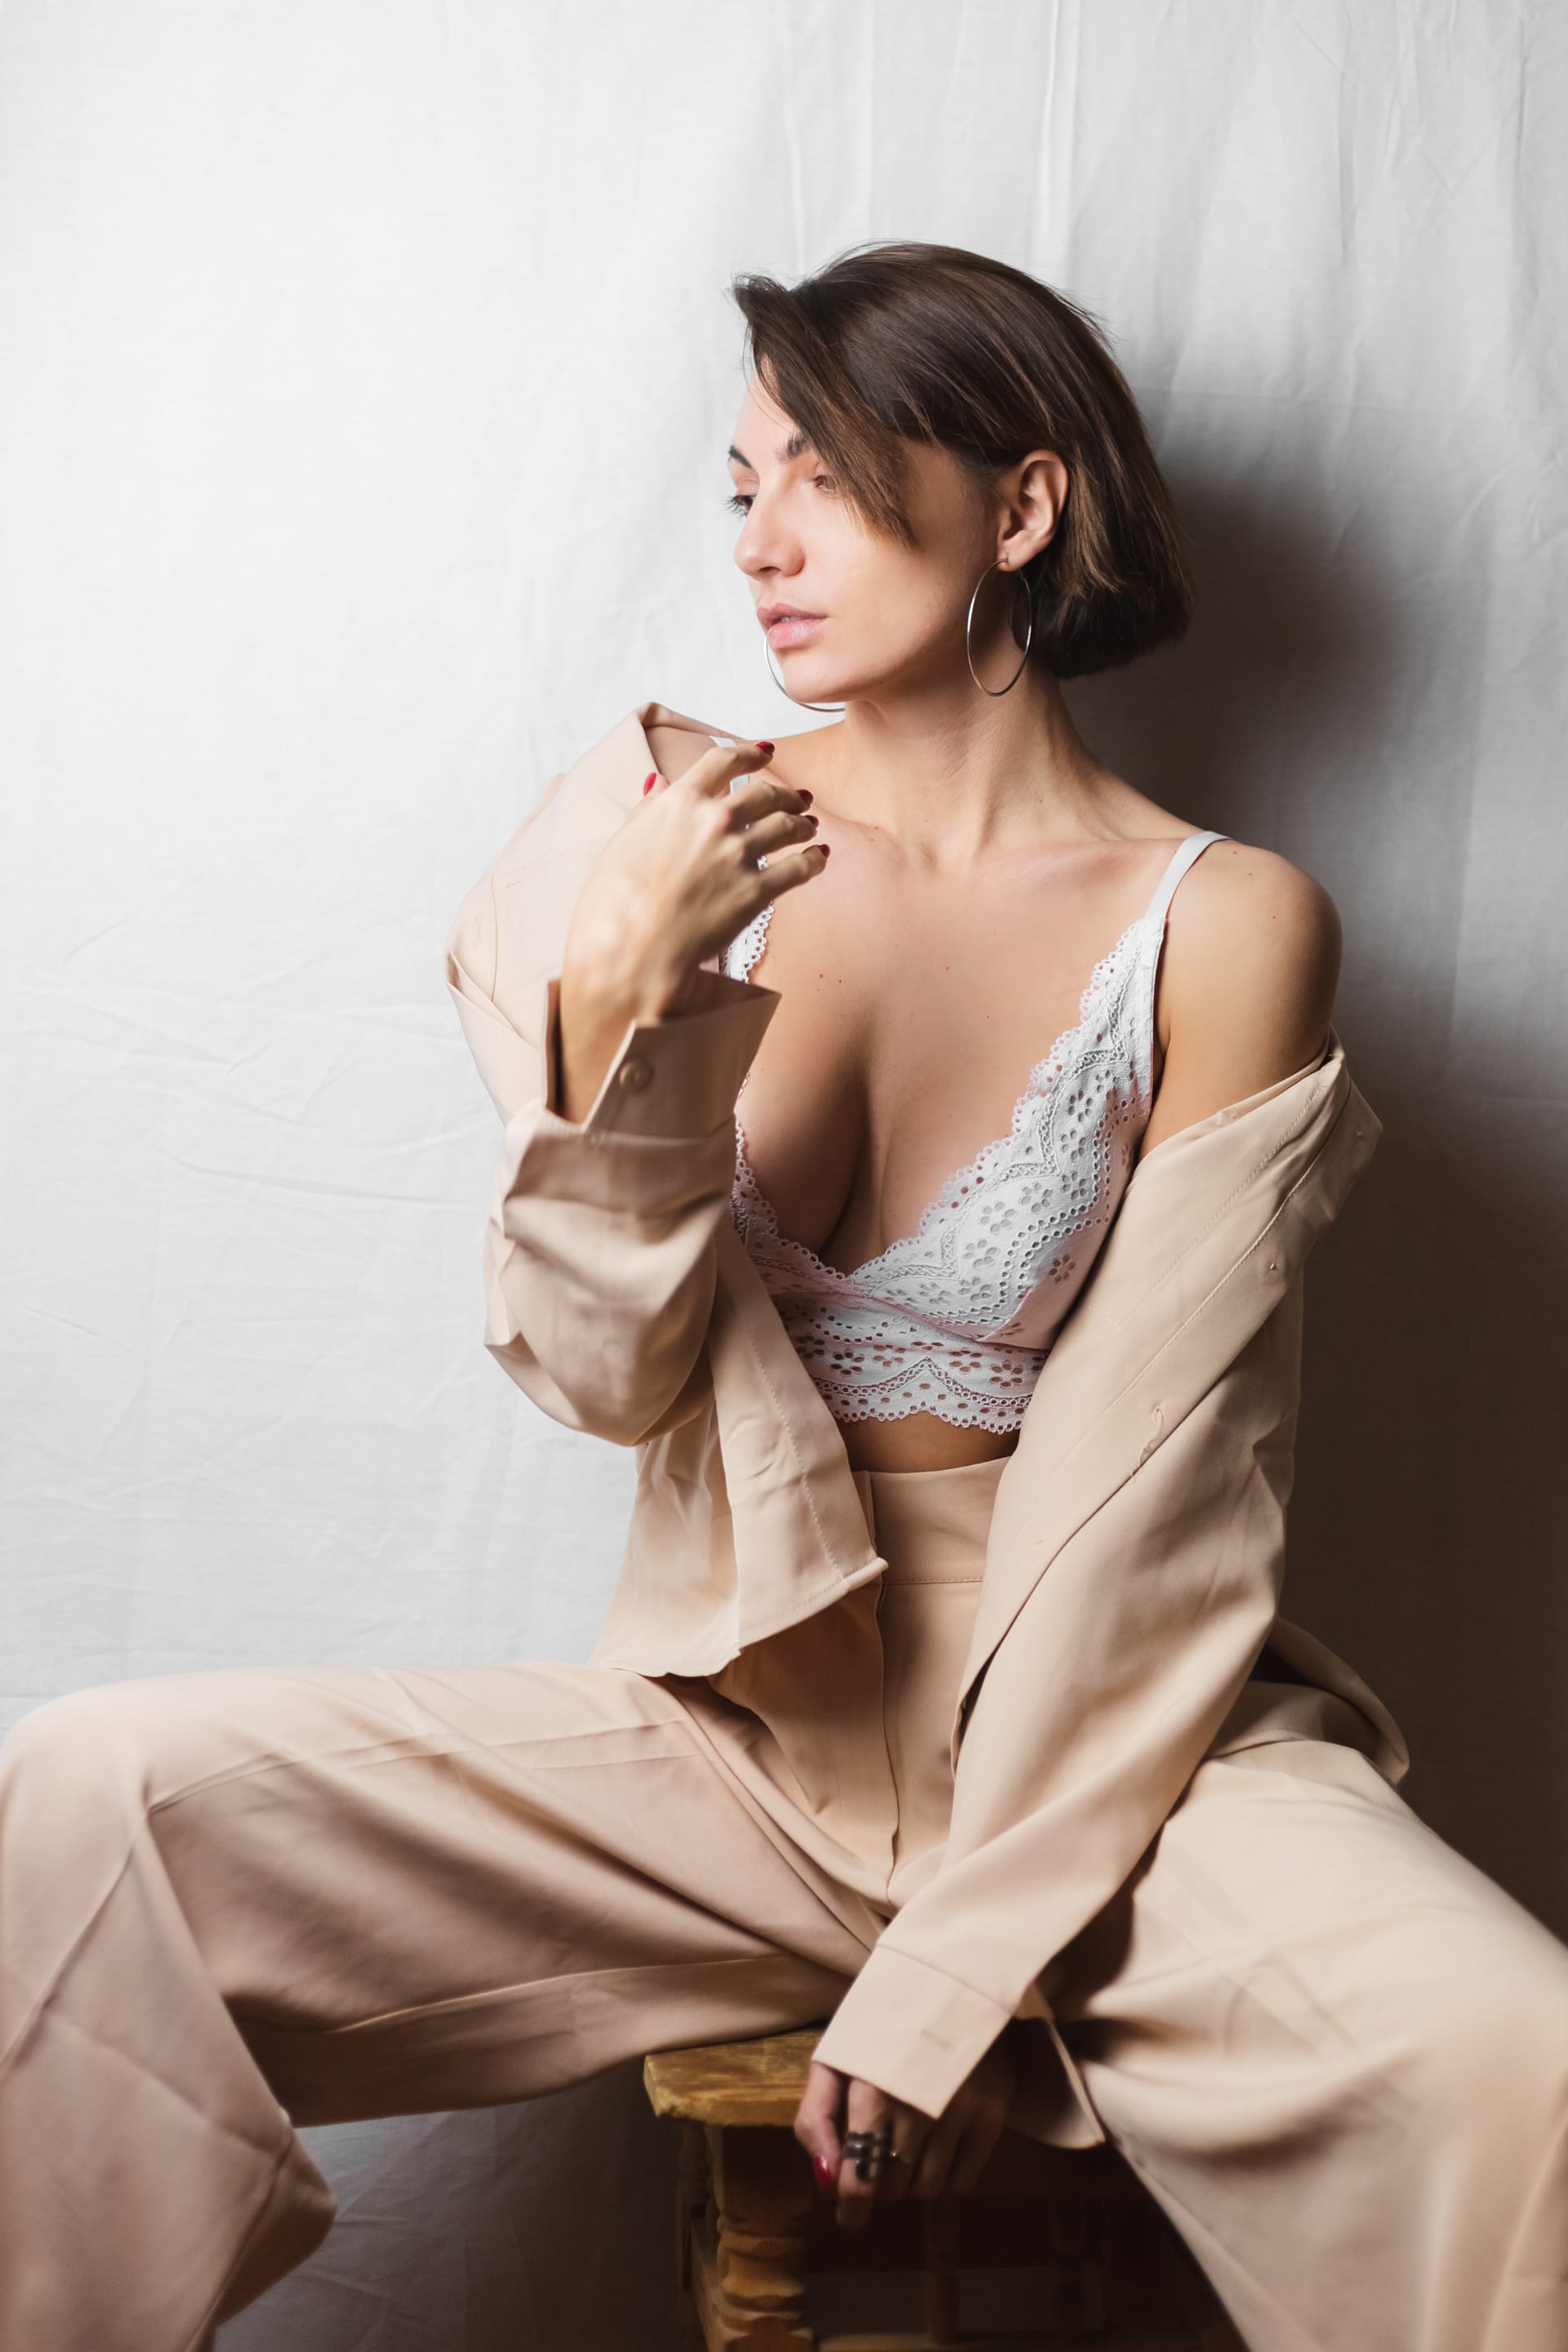 Woman with big breasts beige suit white lace bra sits chair gray white